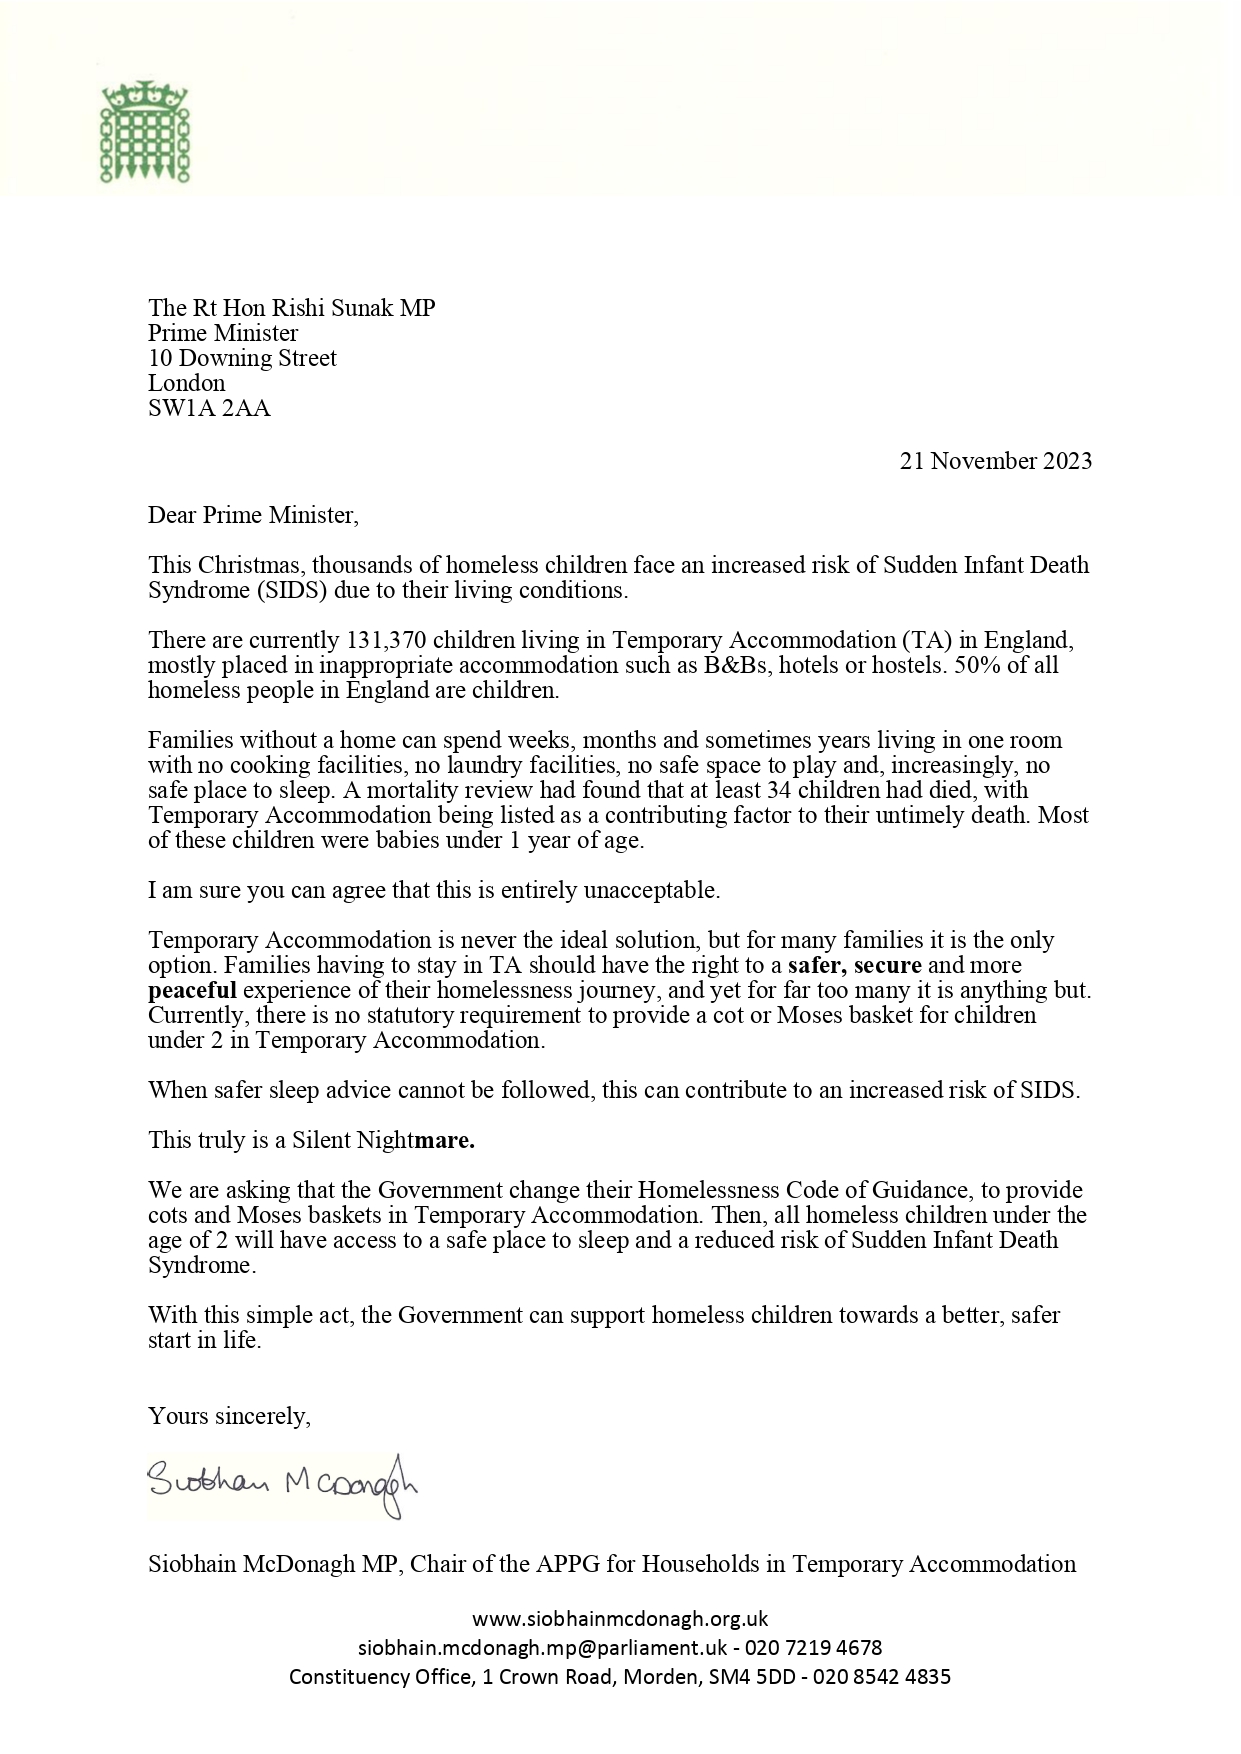 Read our letter to the Prime Minister